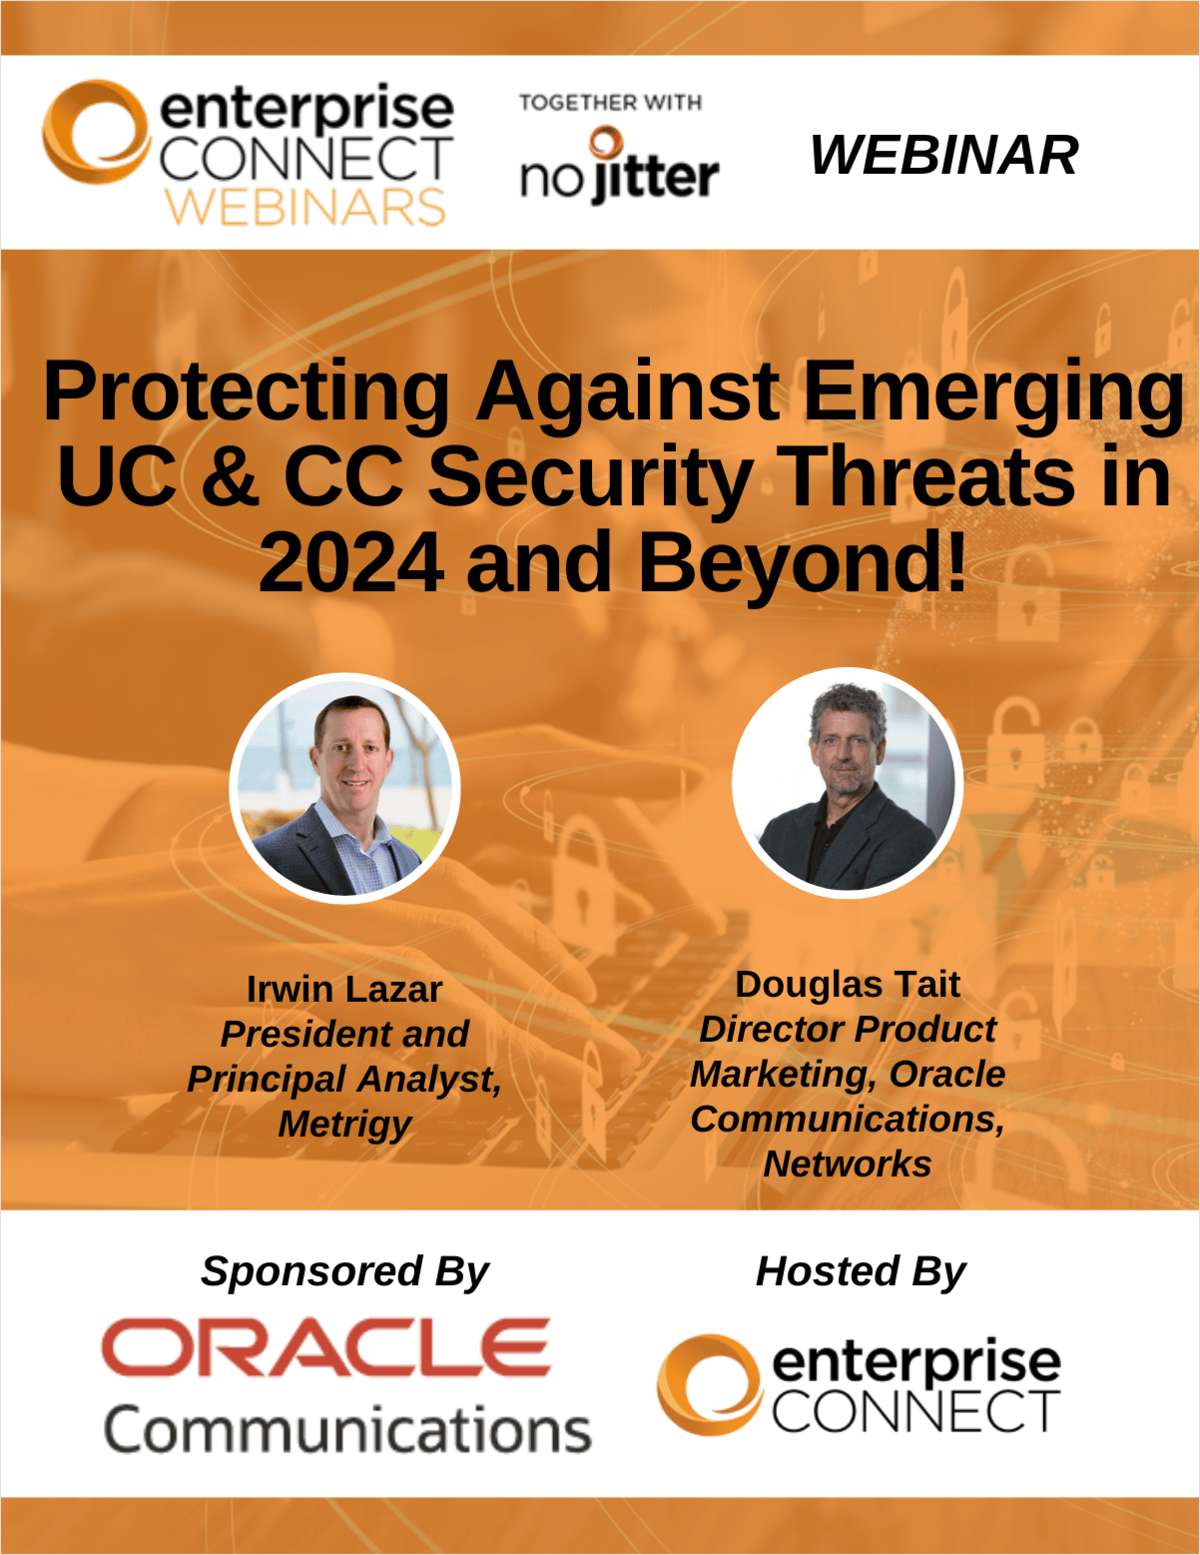 Protecting Against Emerging UC & CC Security Threats in 2024 and Beyond!